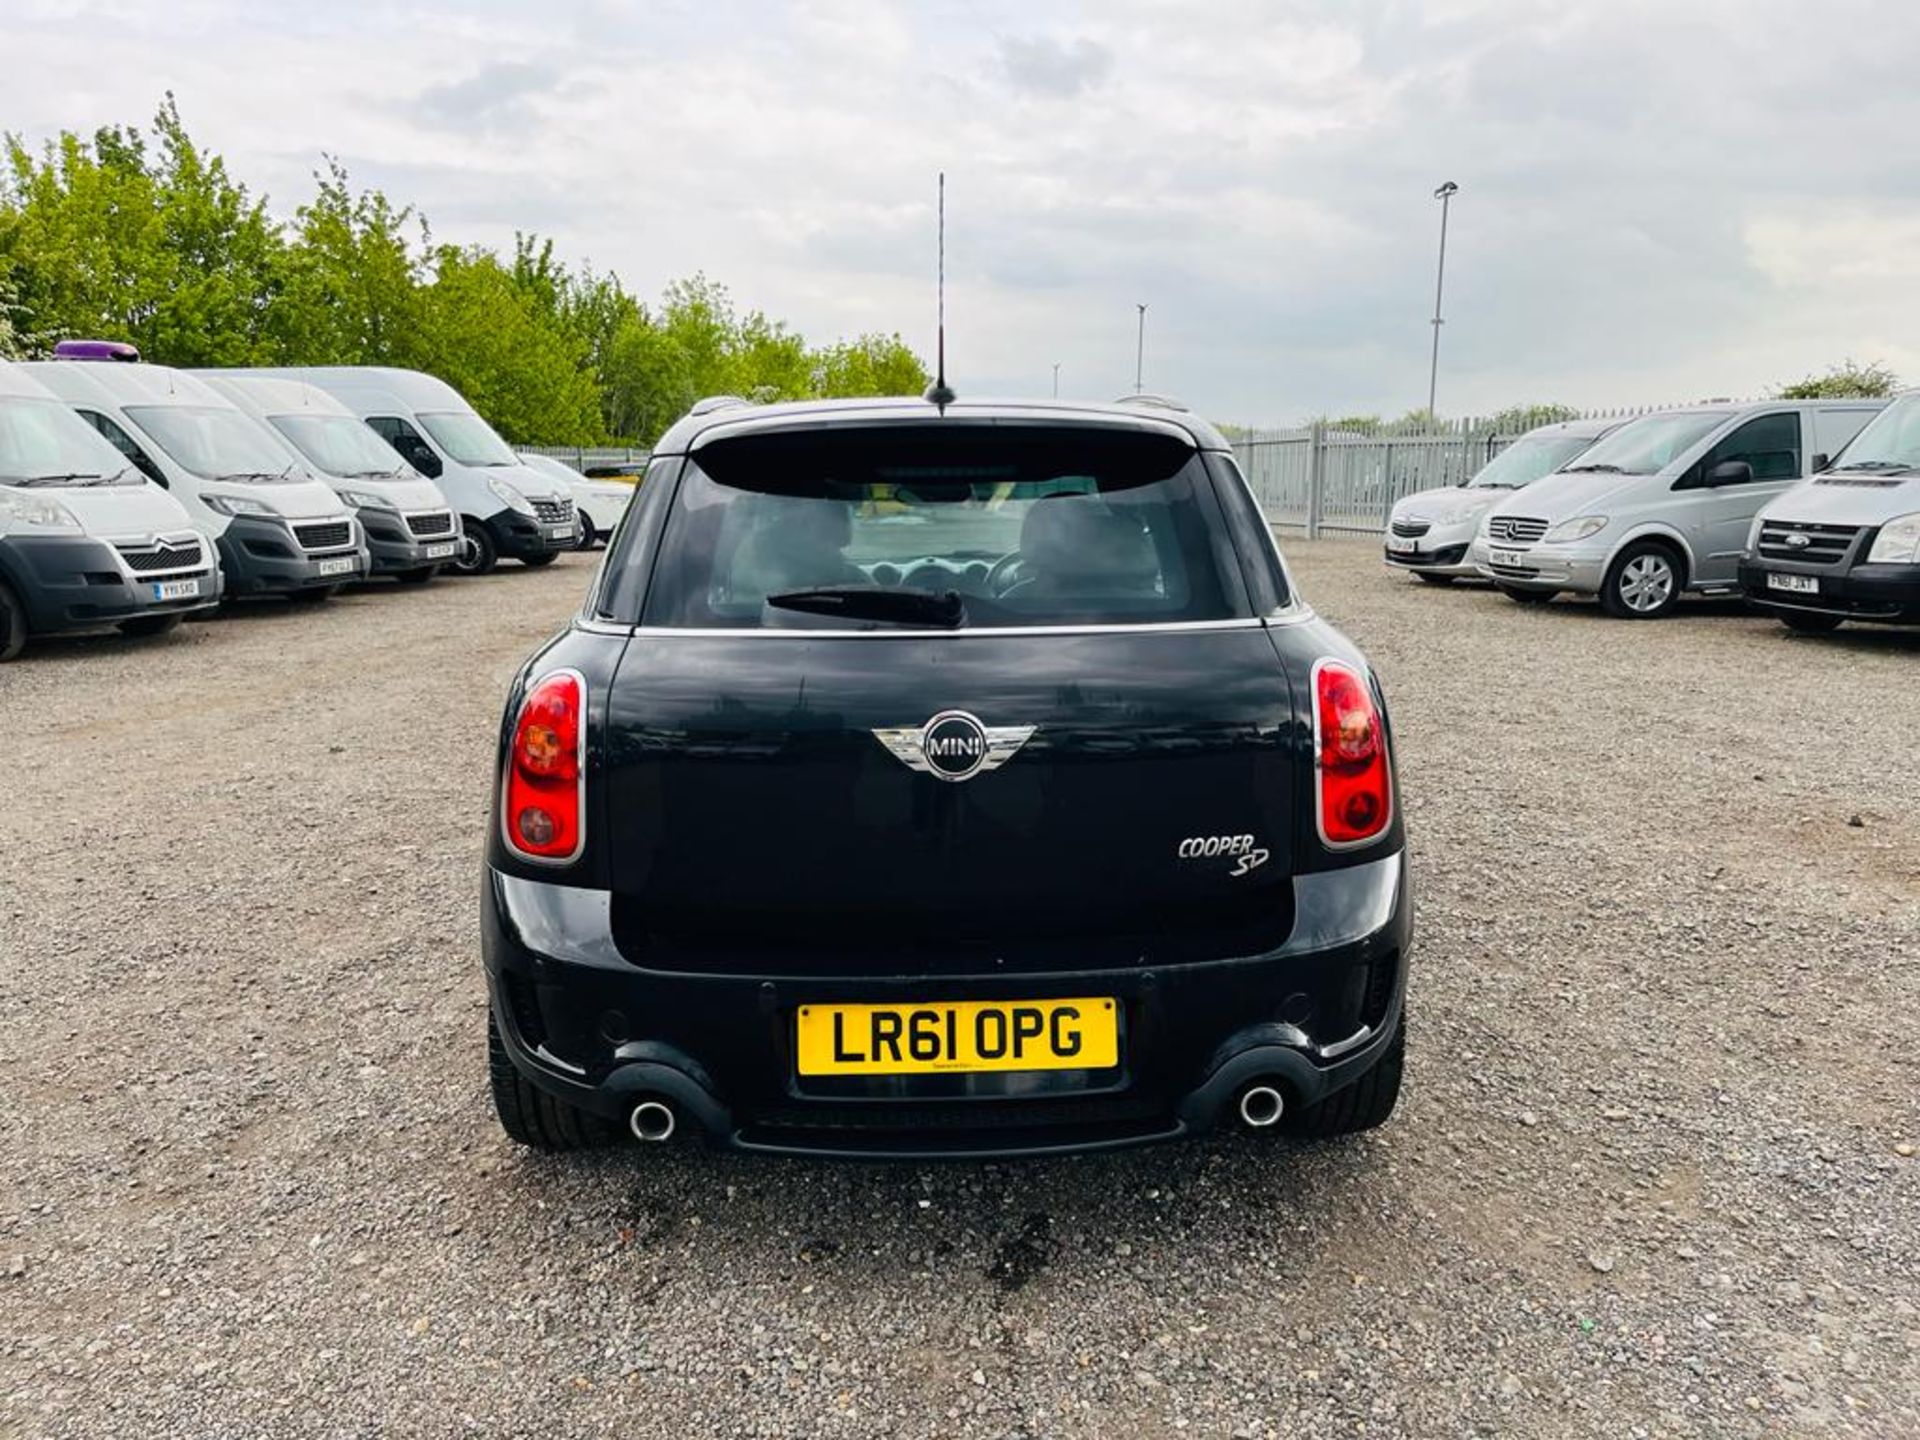 **ON SALE** Mini Cooper Countryman All4 SD 2.0 2011 "61 Reg" - Start/Stop - Alloy Wheels -Navigation - Image 6 of 25